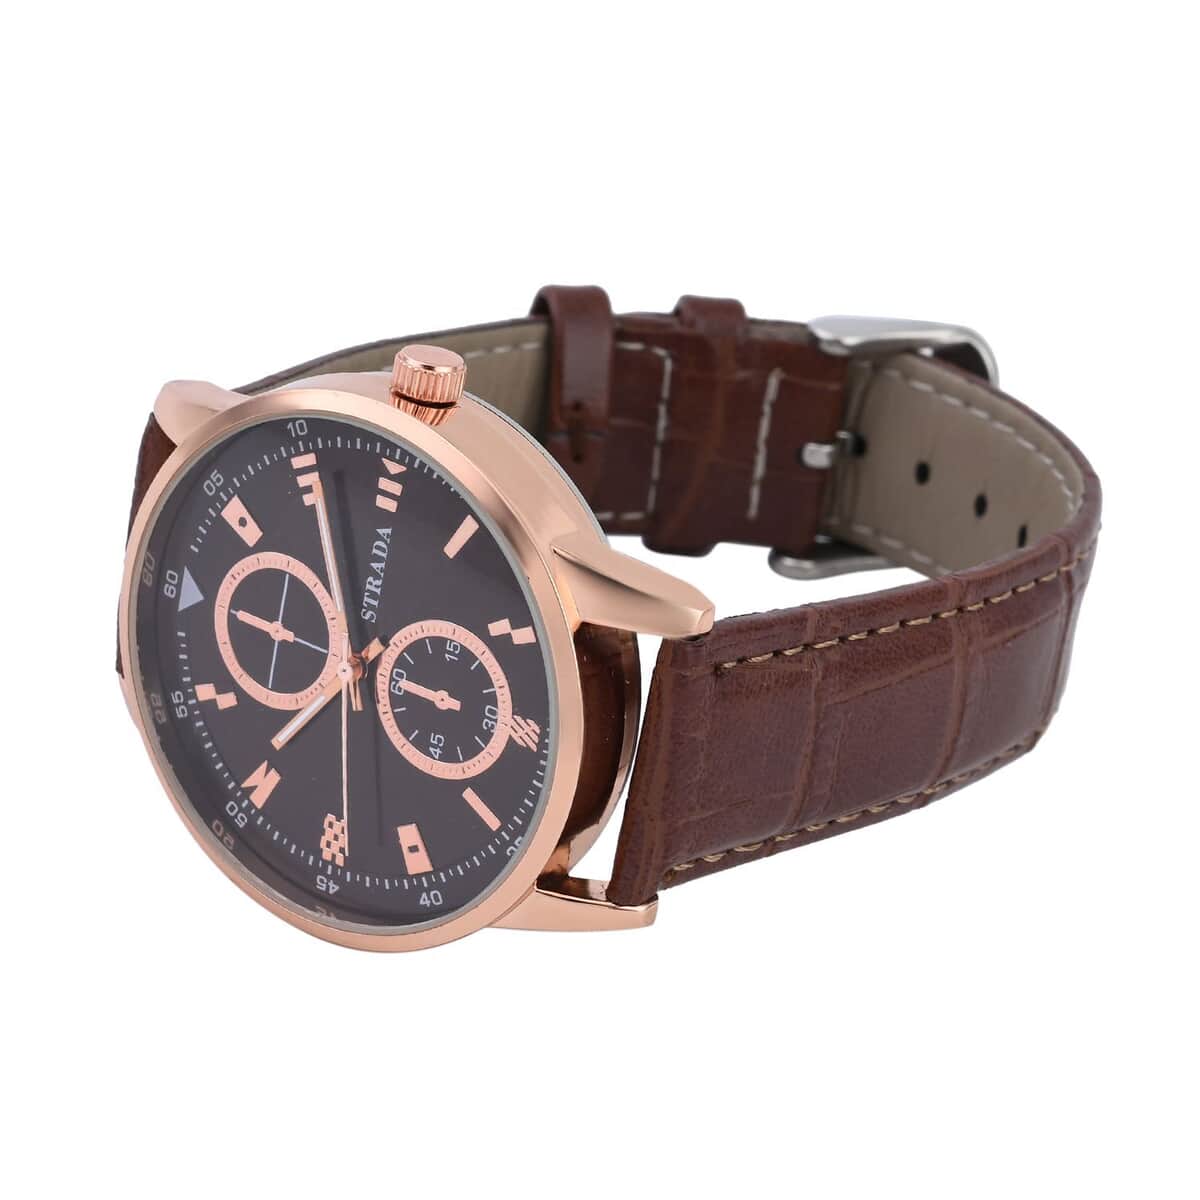 Strada Japanese Movement Watch in Rosetone with Brown Faux Leather Strap (40.65mm) (5.75-7.75 Inches) image number 4